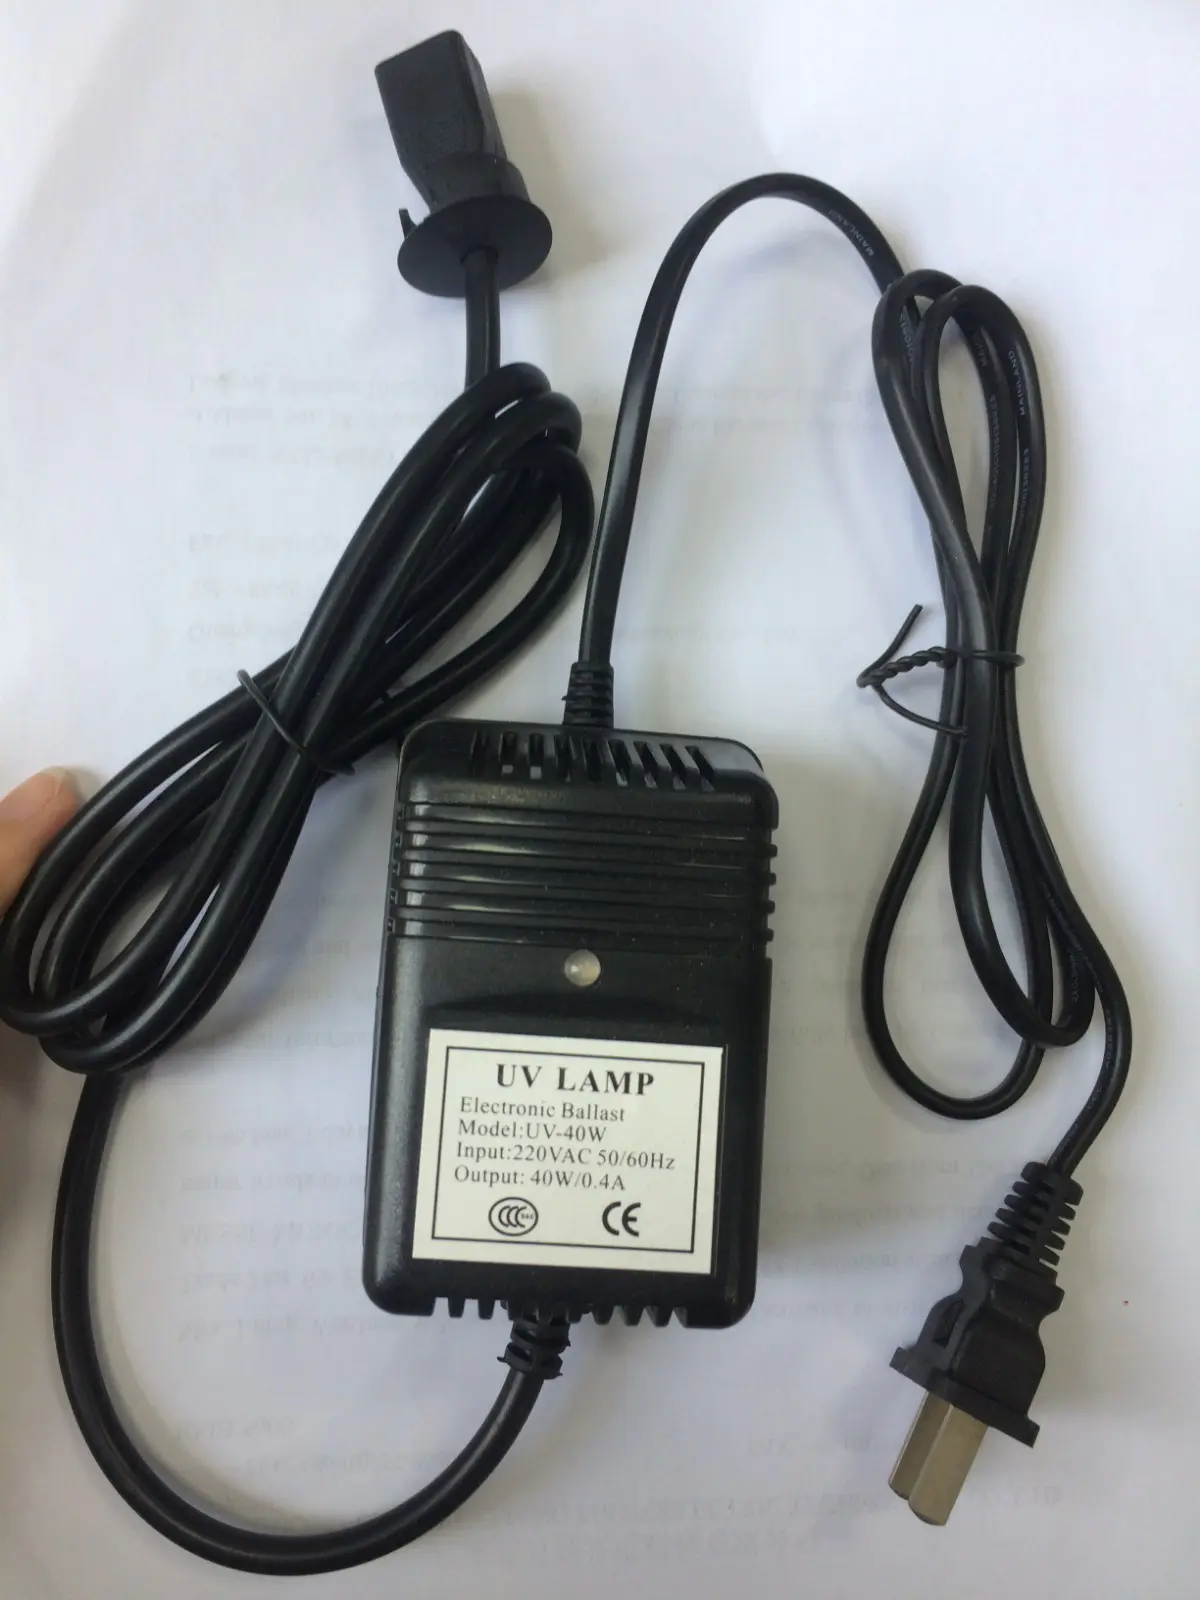 LiangYueLiang preheat electronic ballast for uv lamp for-sale for domestic